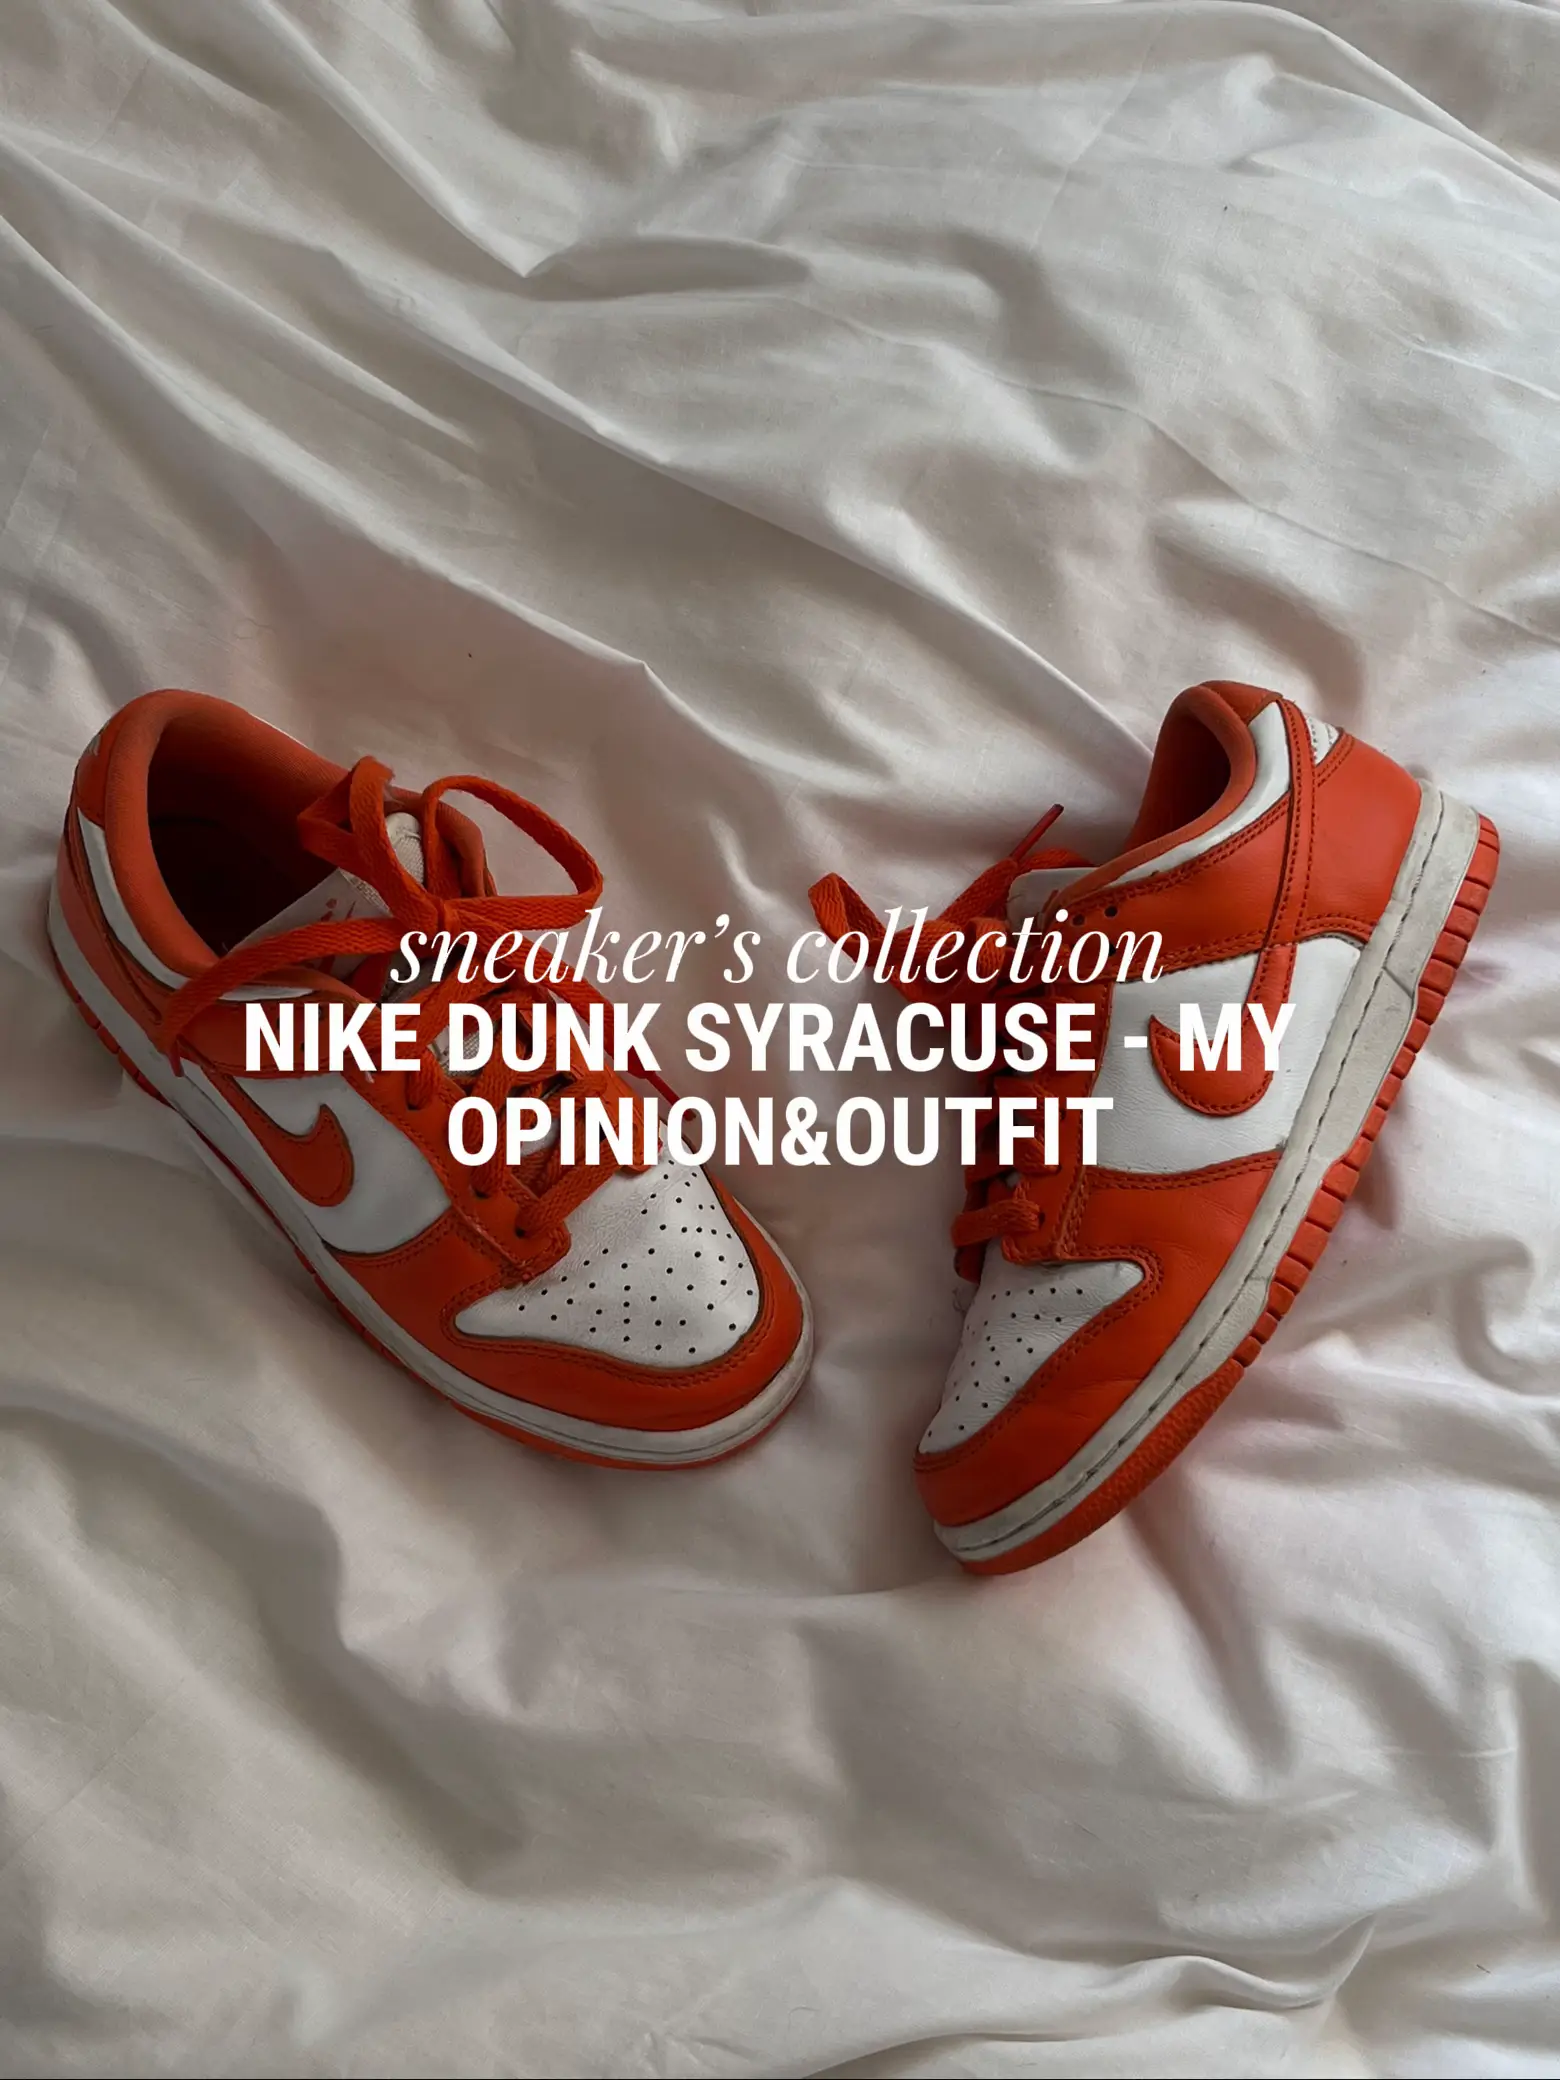 syracuse dunk high ootd  Dunks outfit, Orange shoes outfit, Dunk